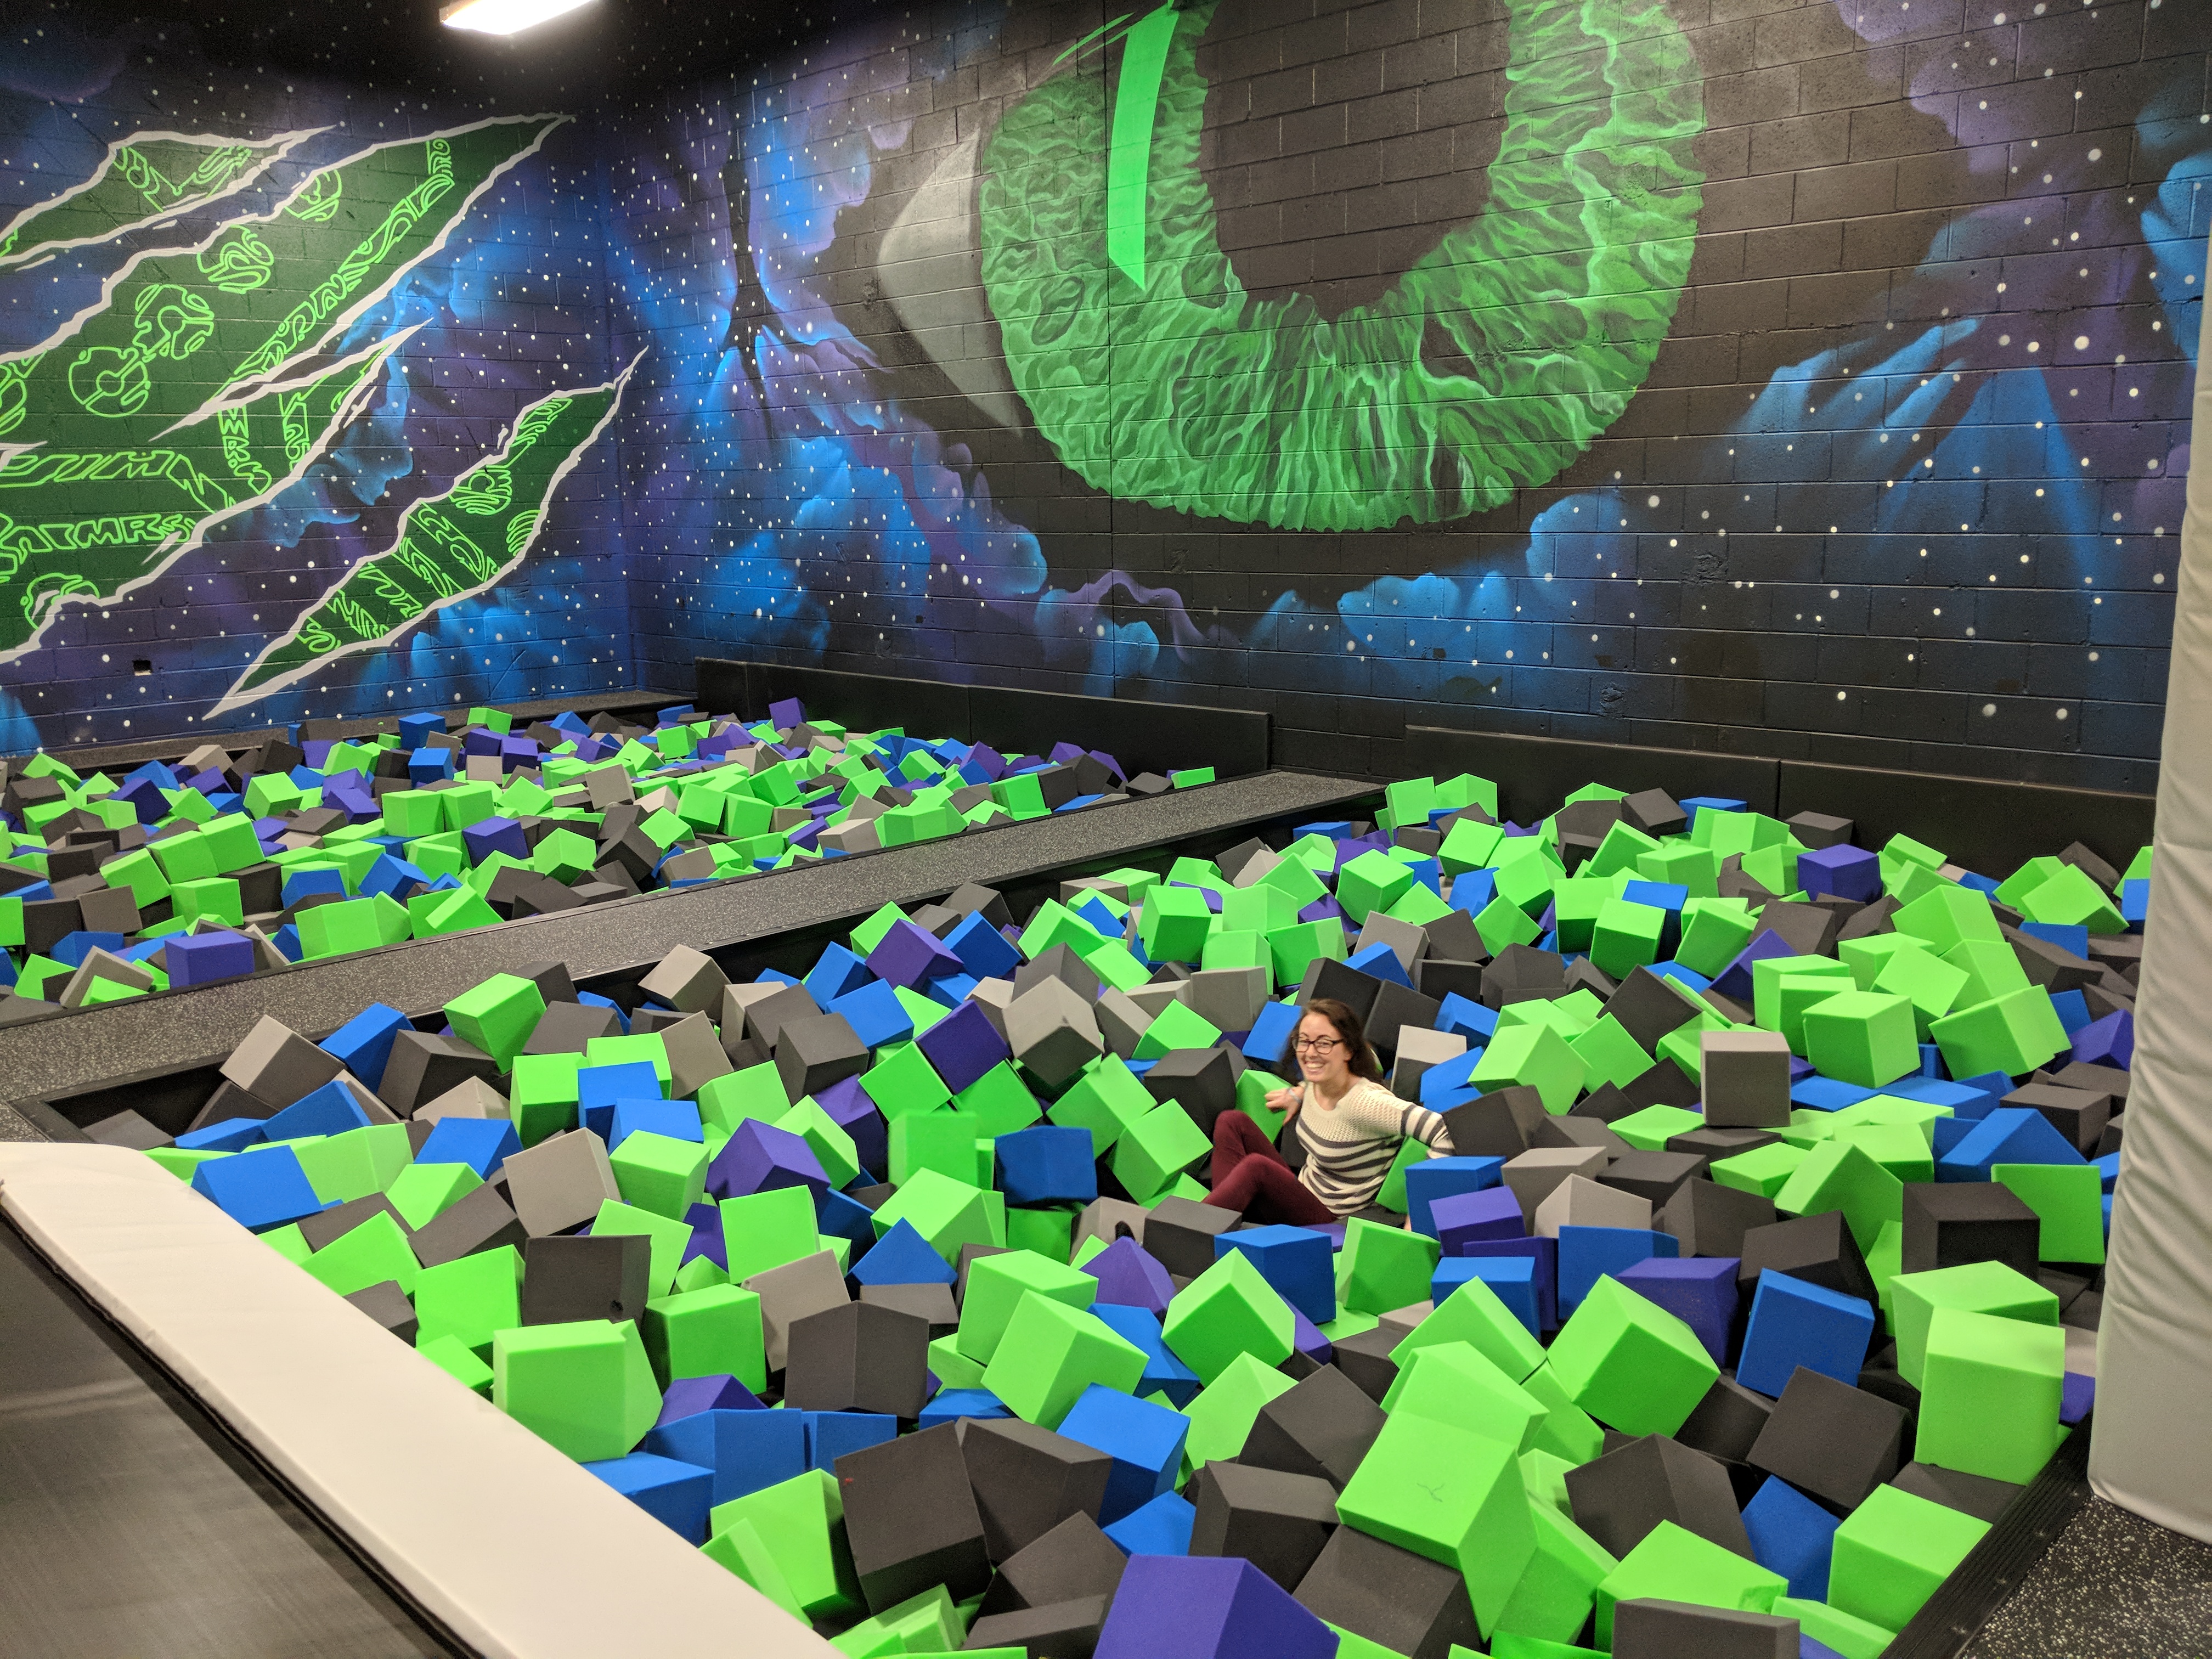 Defy Gravity Trampoline Park brings new life to once vacant retail space -  University City Partners